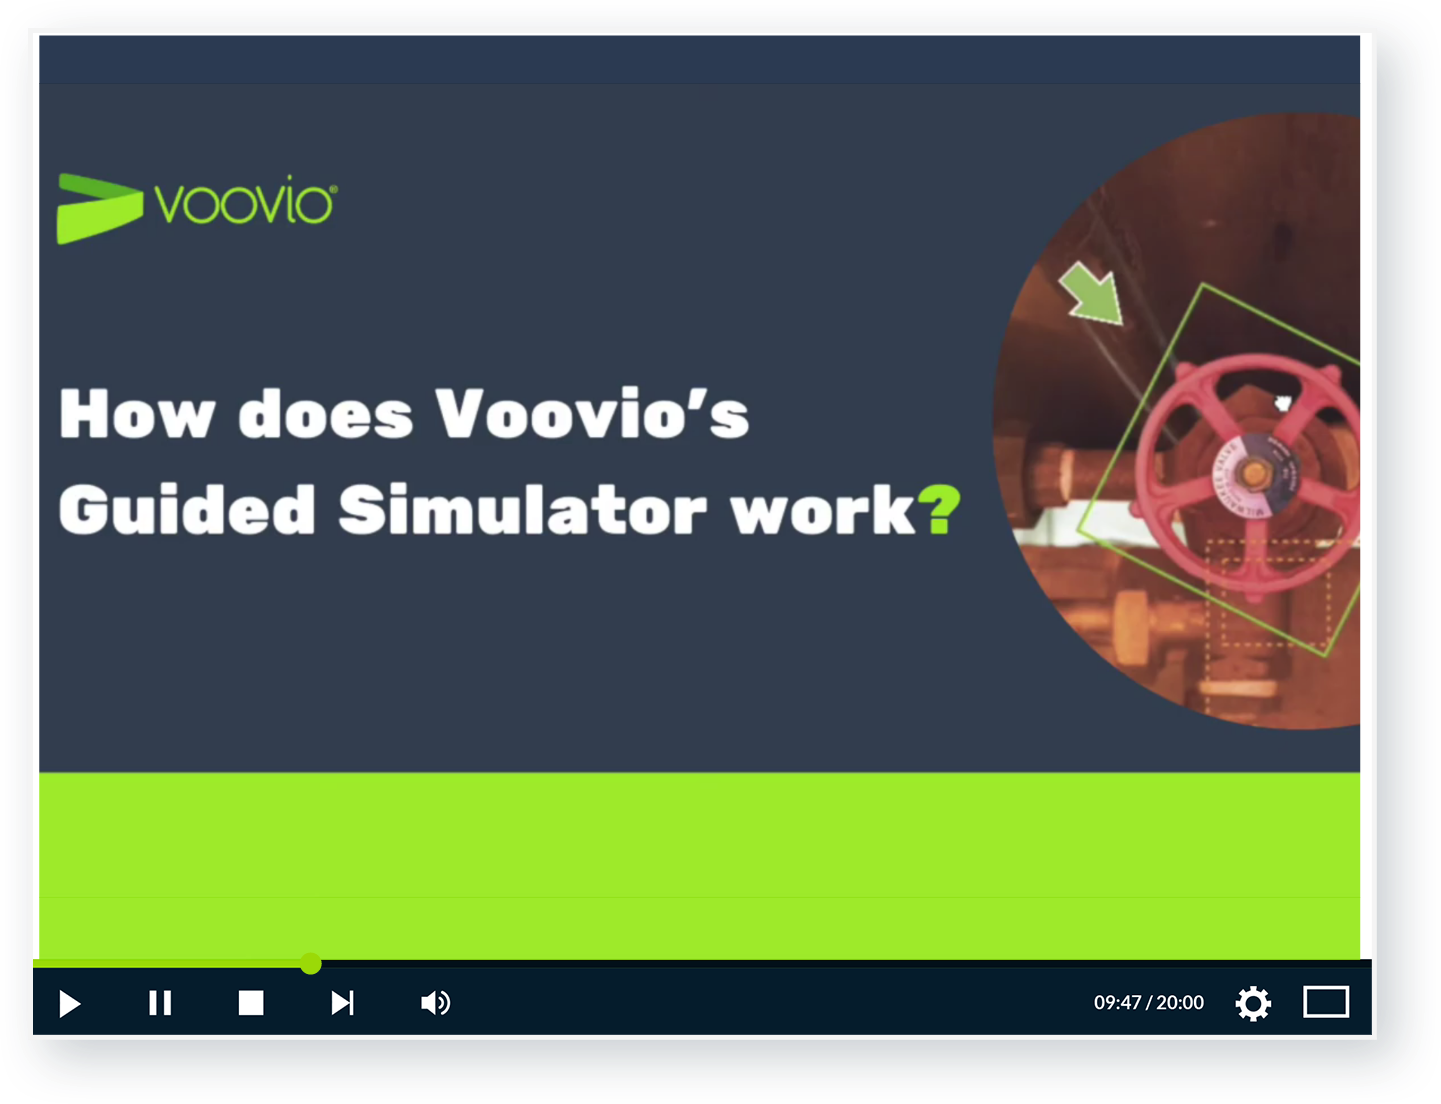 ow-does-Voovios-Guided-Simulator-work